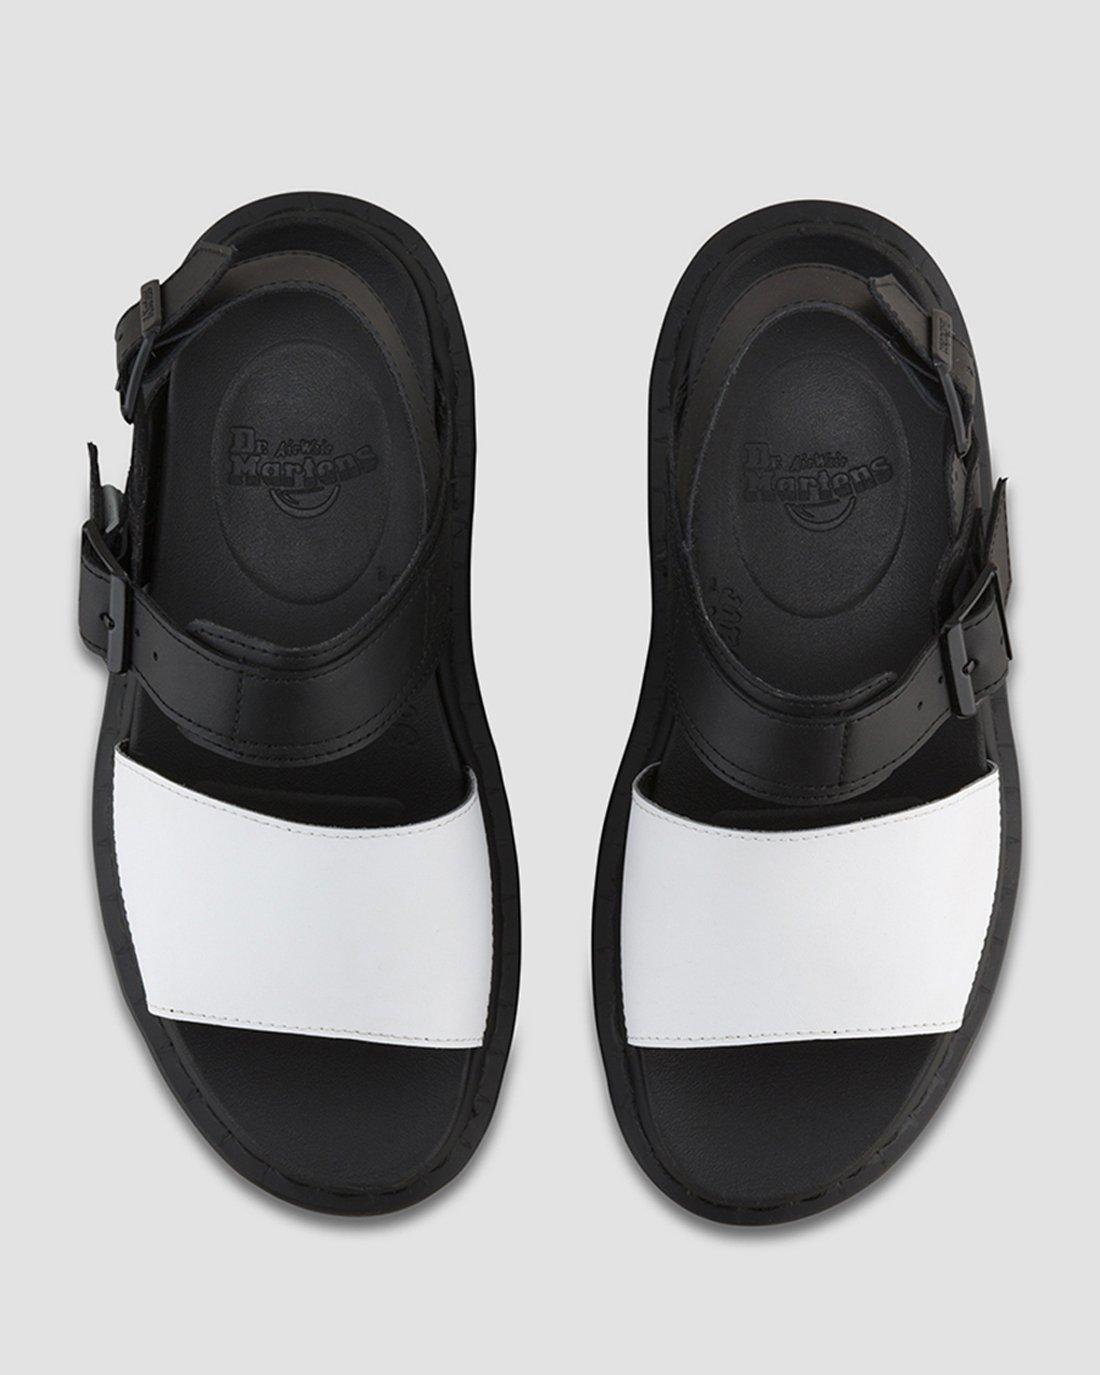 Voss Hydro Leather Strap Sandals in Black+White